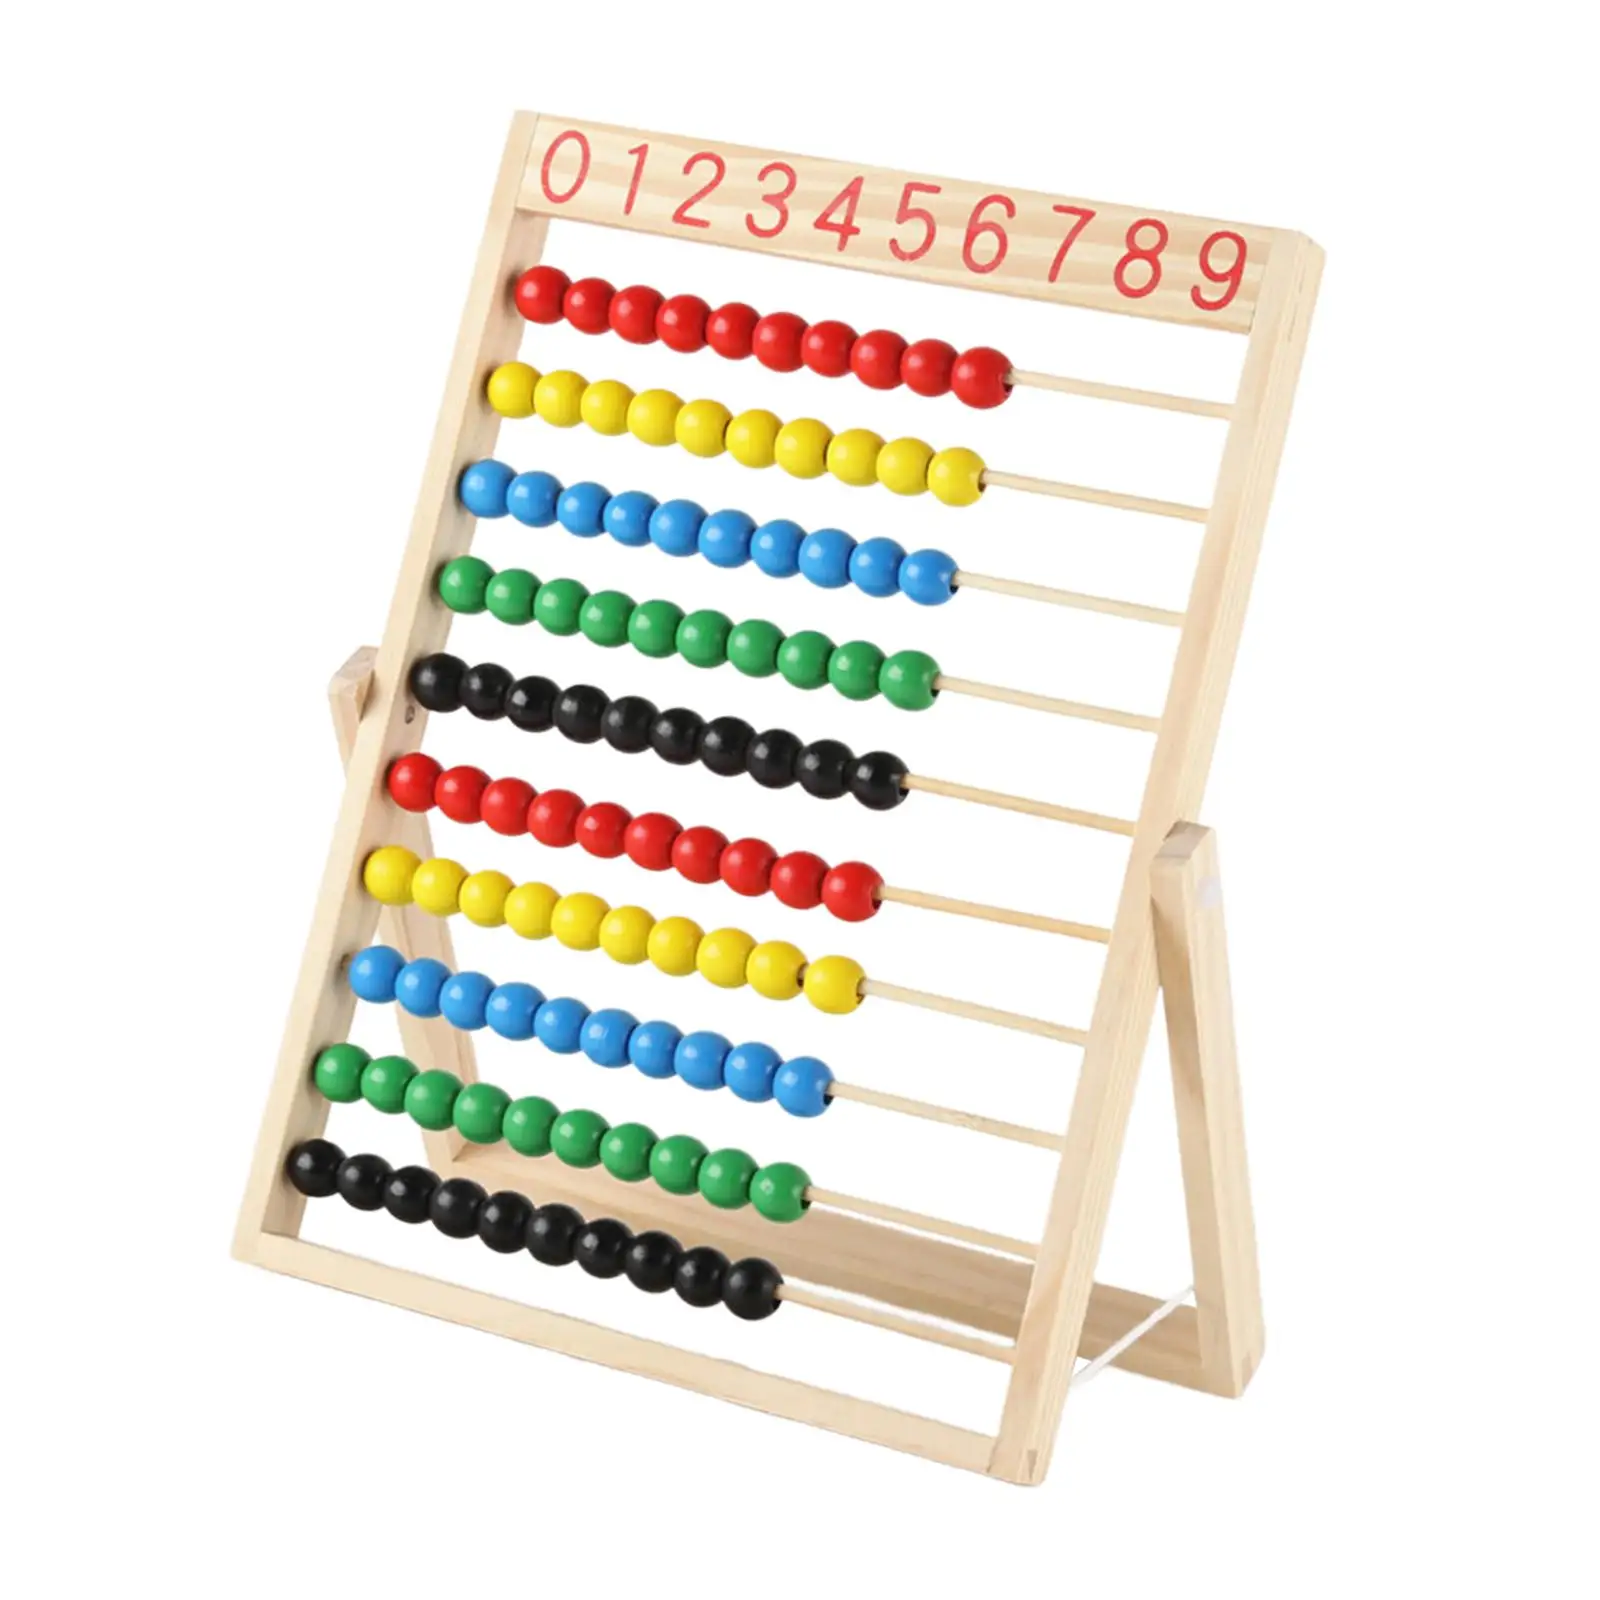 Counting Frame Counting Abacus Toy for Toddlers Elementary Interactive Toys